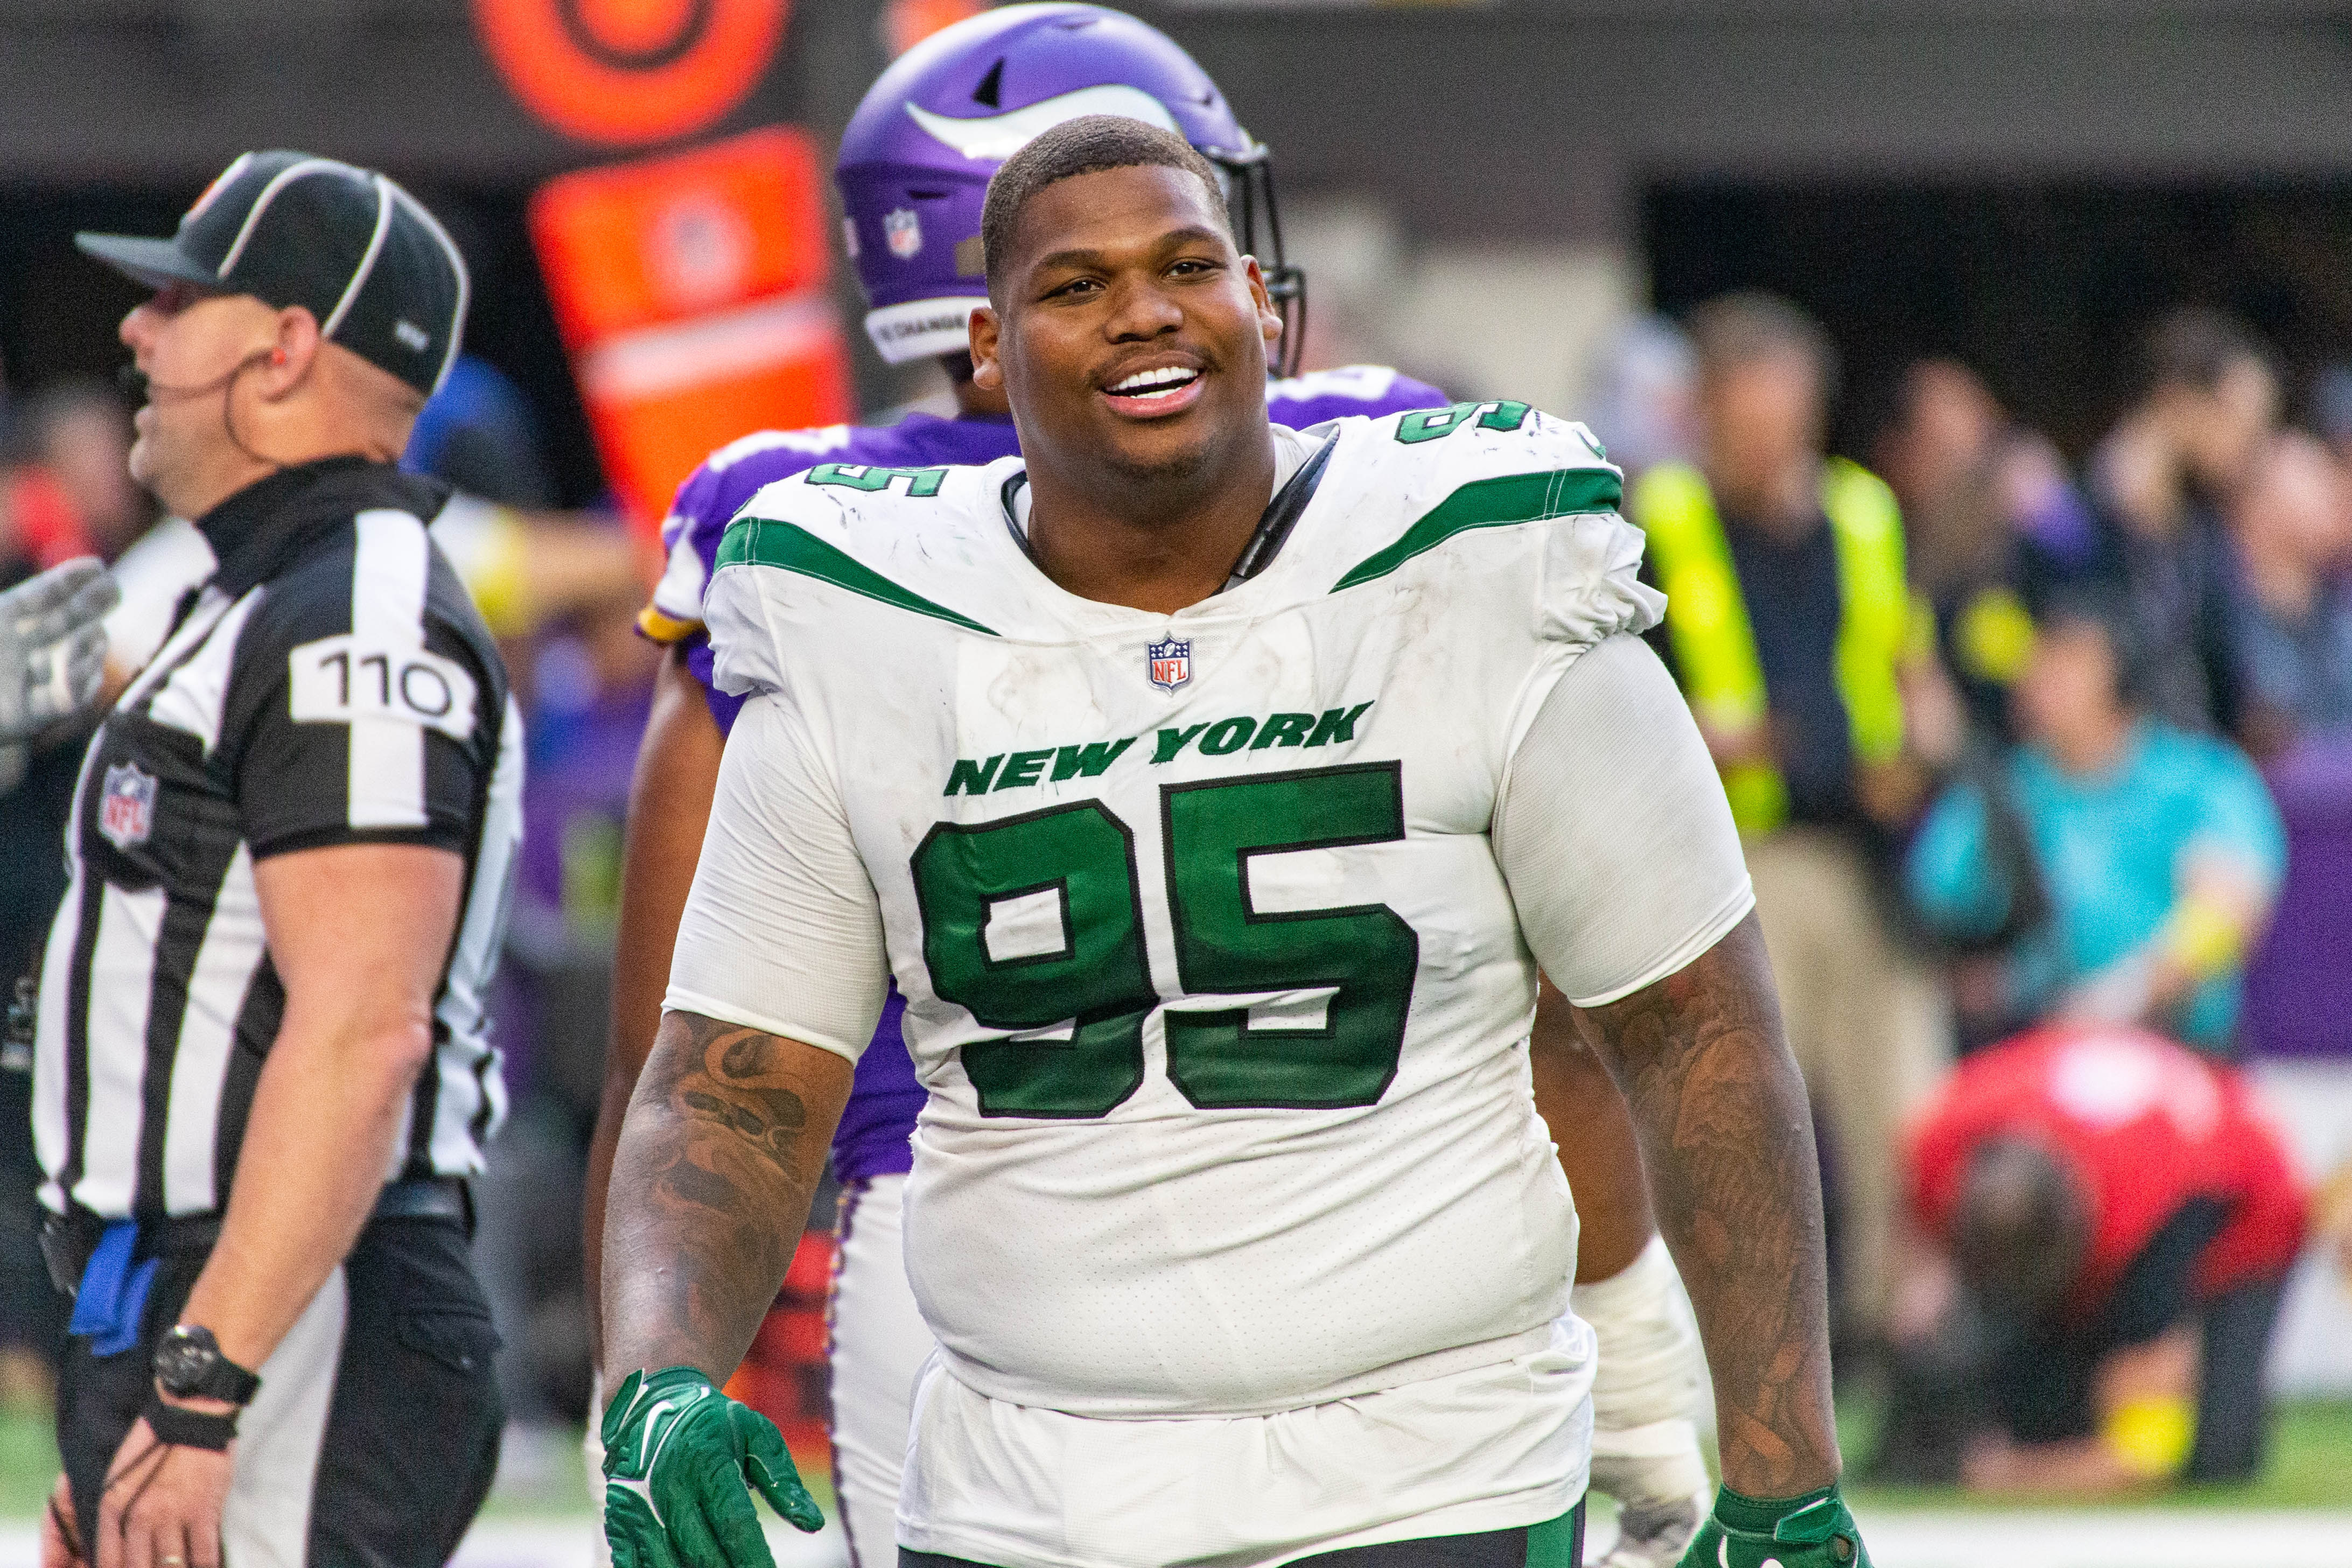 Defensive tackle Quinnen Williams of the New York Jets looks on in the game against the Minnesota Vikings at U.S. Bank Stadium in Minneapolis, Minnesota, December 4, 2022,. /CFP